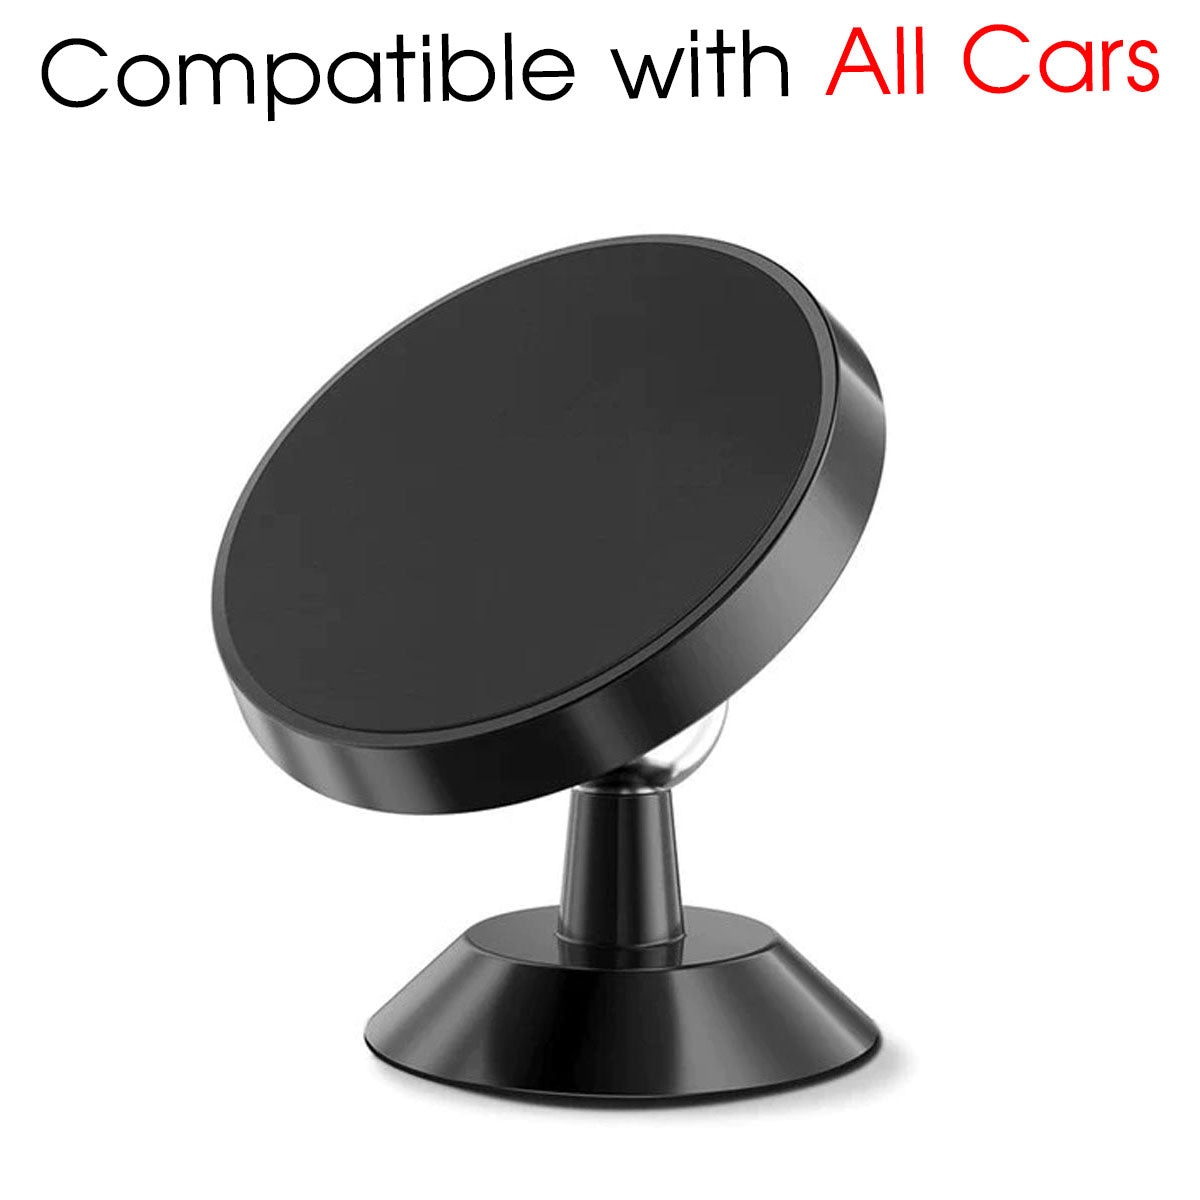 [2 Pack ] Magnetic Phone Mount, Custom For Cars, [ Super Strong Magnet ] [ with 4 Metal Plate ] car Magnetic Phone Holder, [ 360° Rotation ] Universal Dashboard car Mount Fits All Cell Phones, Car Accessories LM13982 - Delicate Leather